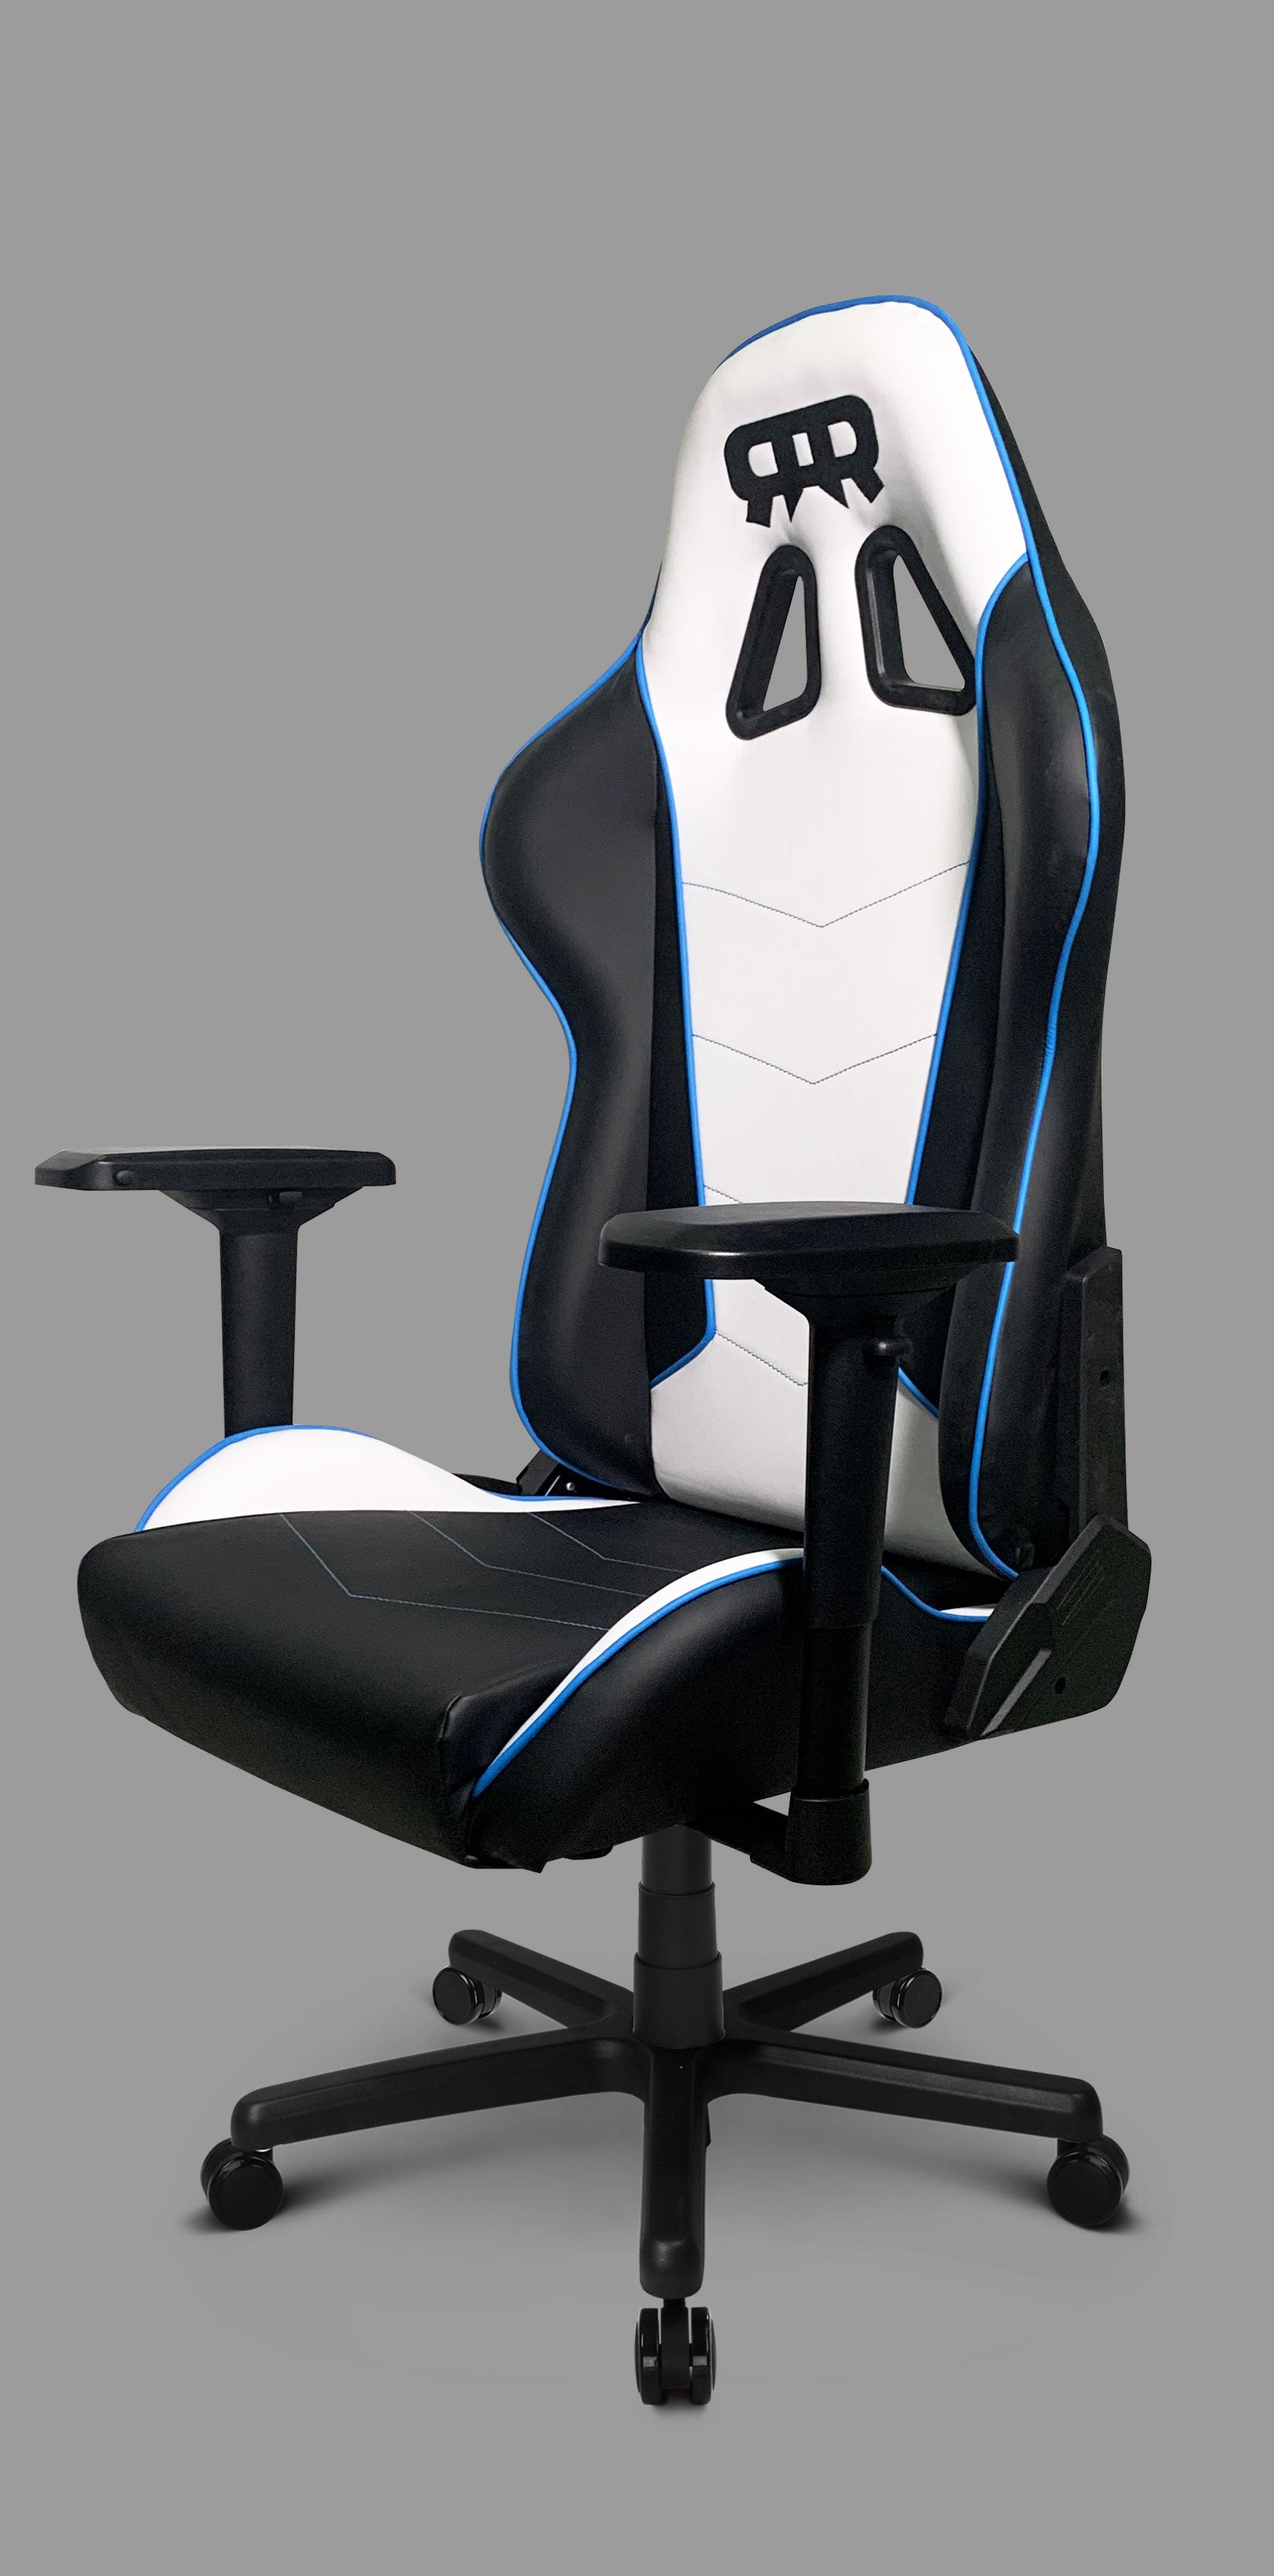 Ransor Legend P5 Gaming Chair in Bahrain - Best Gaming Accessories